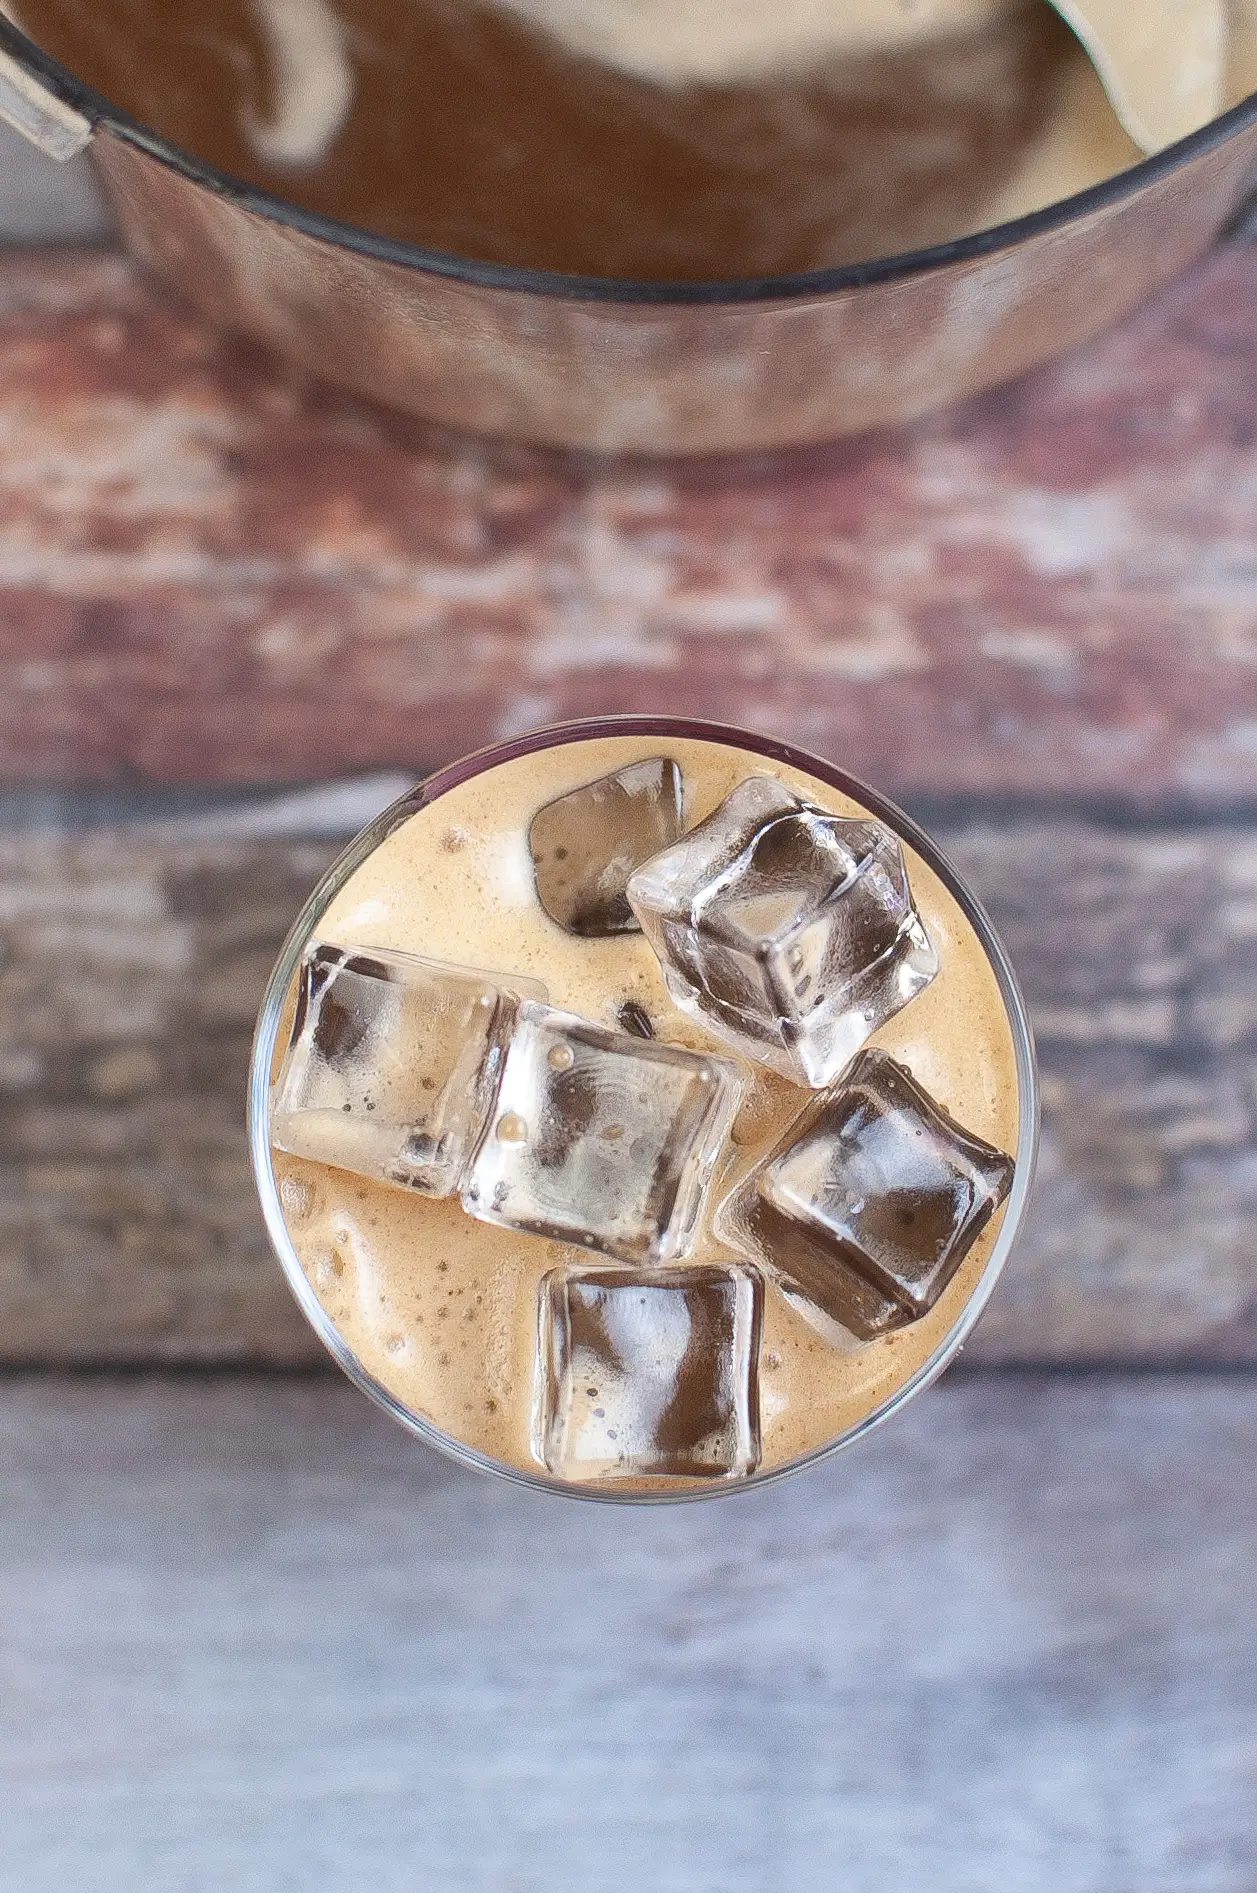 All ingredients for Iced Bulletproof coffee blended in a glass over ice.